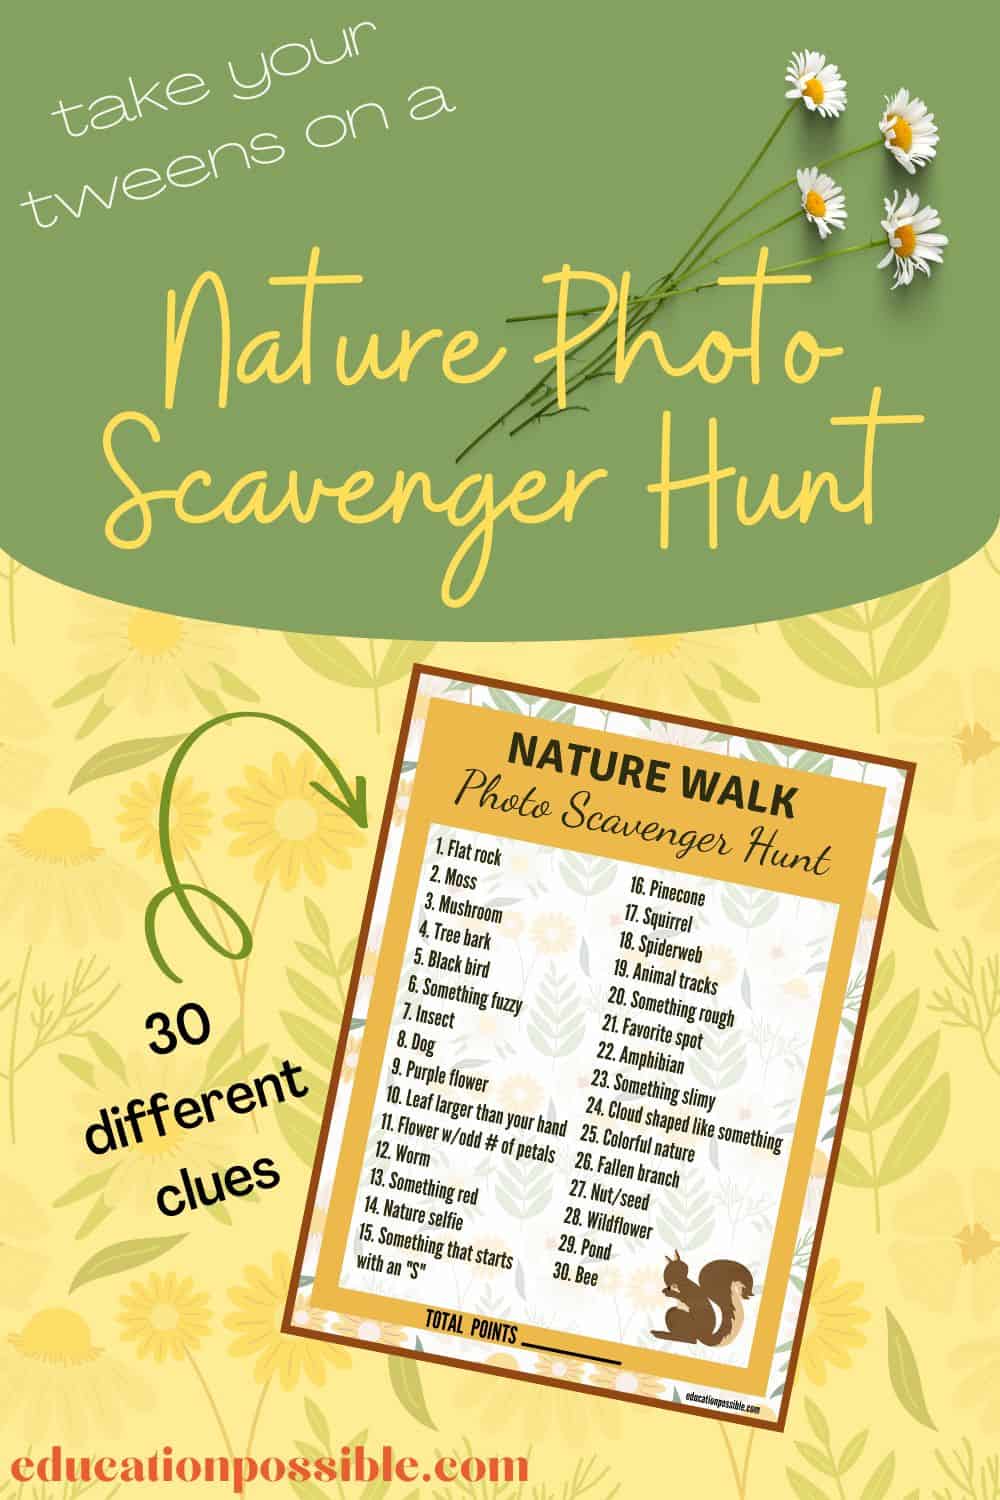 Graphic of a printable photo scavenger hunt list for a nature walk.